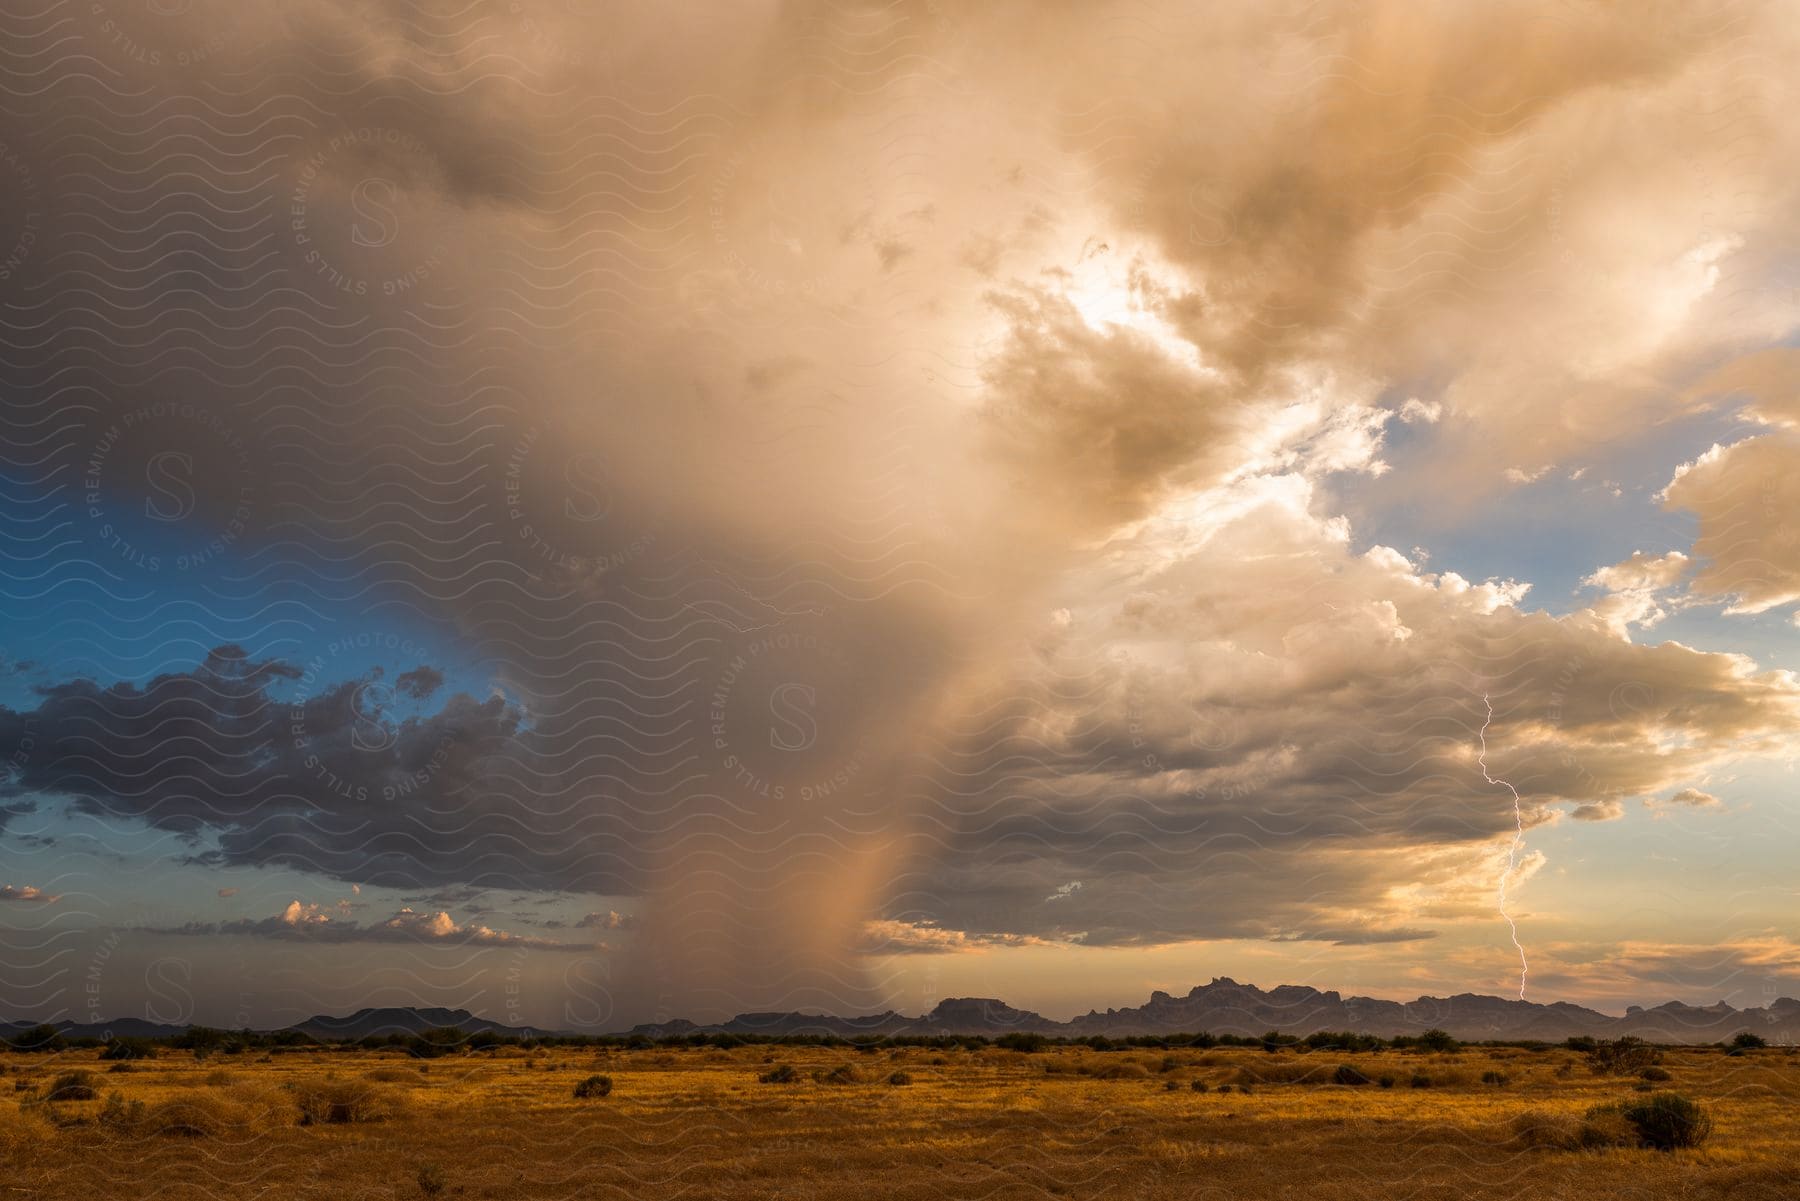 A tornado touches down in a storm on the horizon in the eagletail mountains west of tonopah az